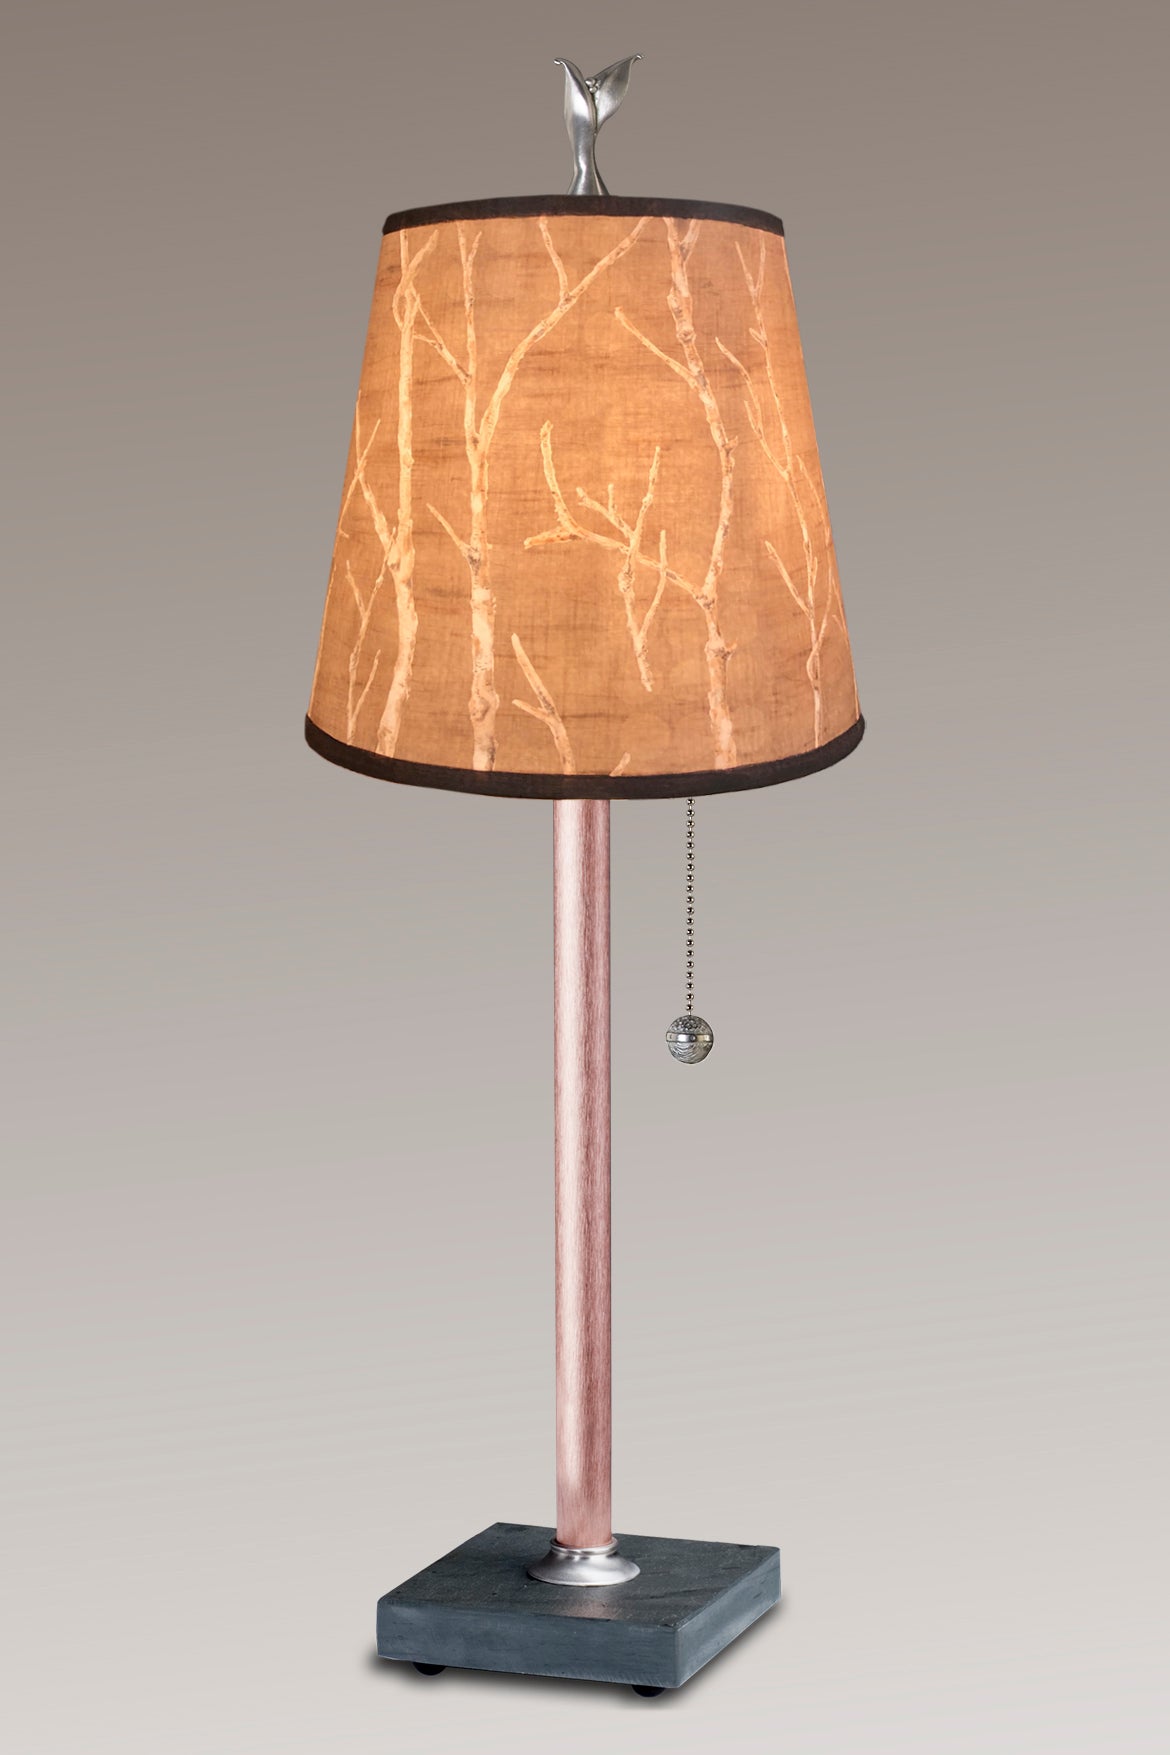 Copper Table Lamp with Small Drum in Twigs